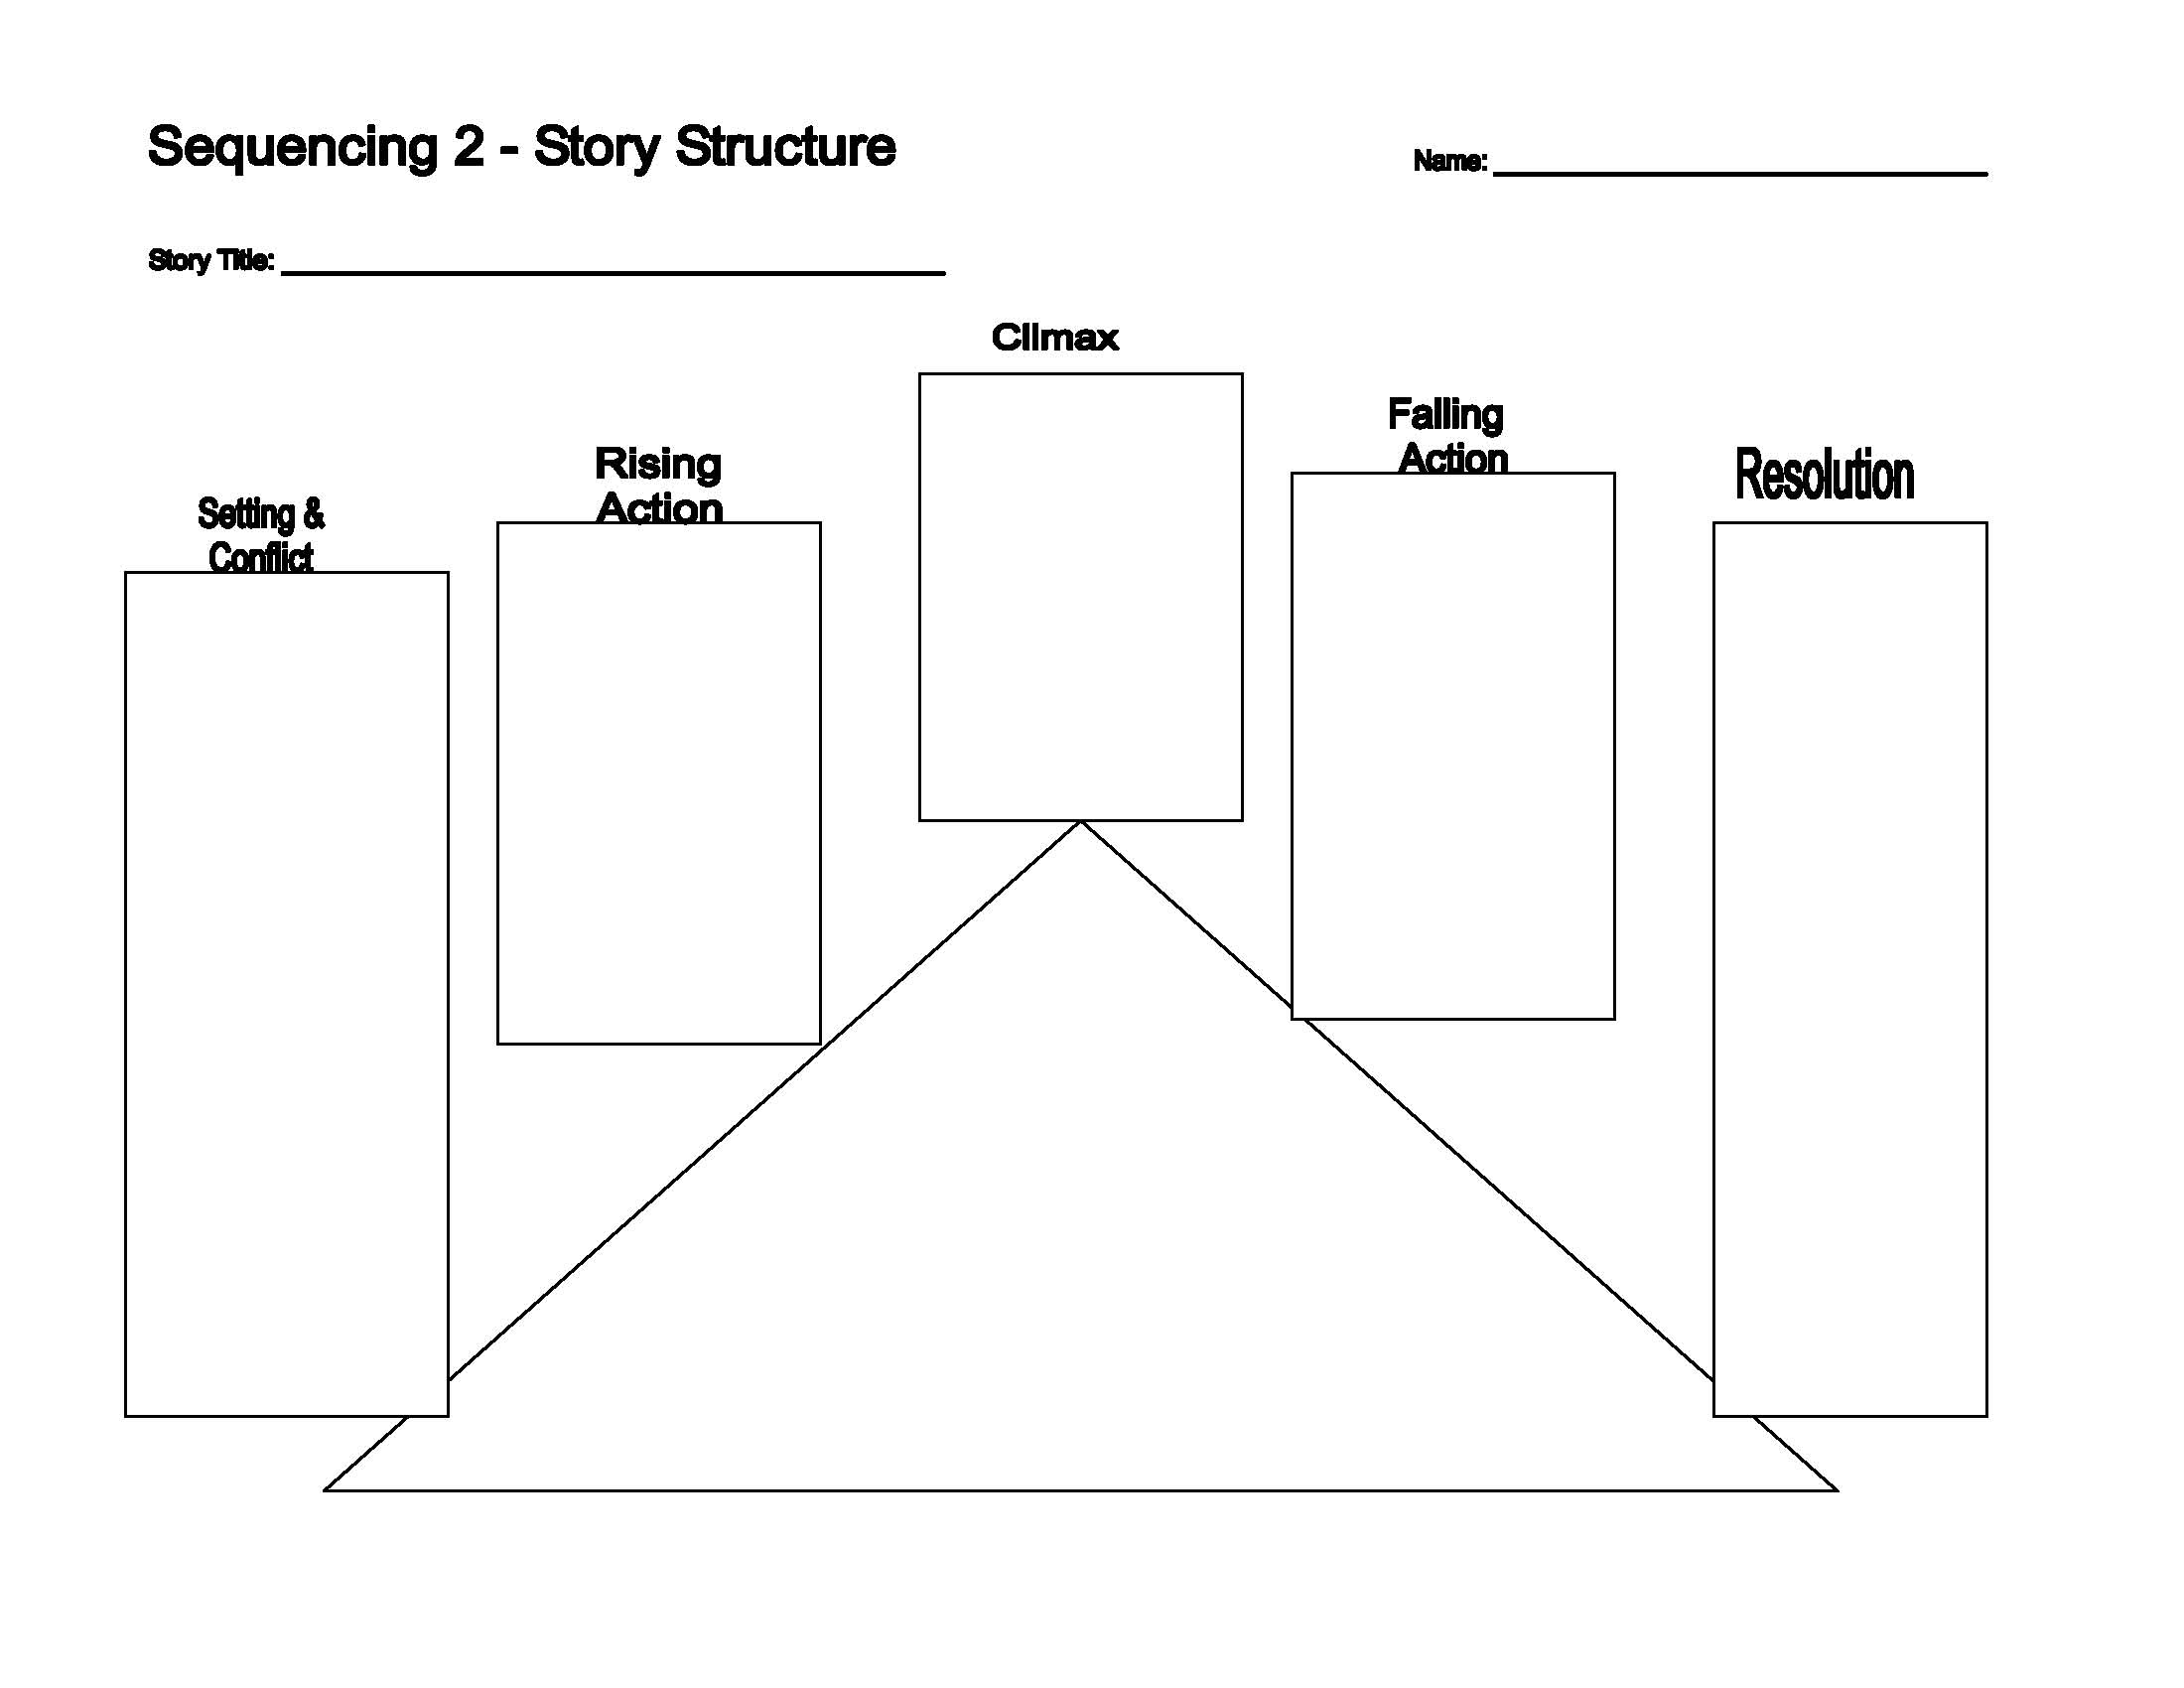 This is a preview image of Story Structure Graphic Organizer 2. Click on it to enlarge it or view the source file.